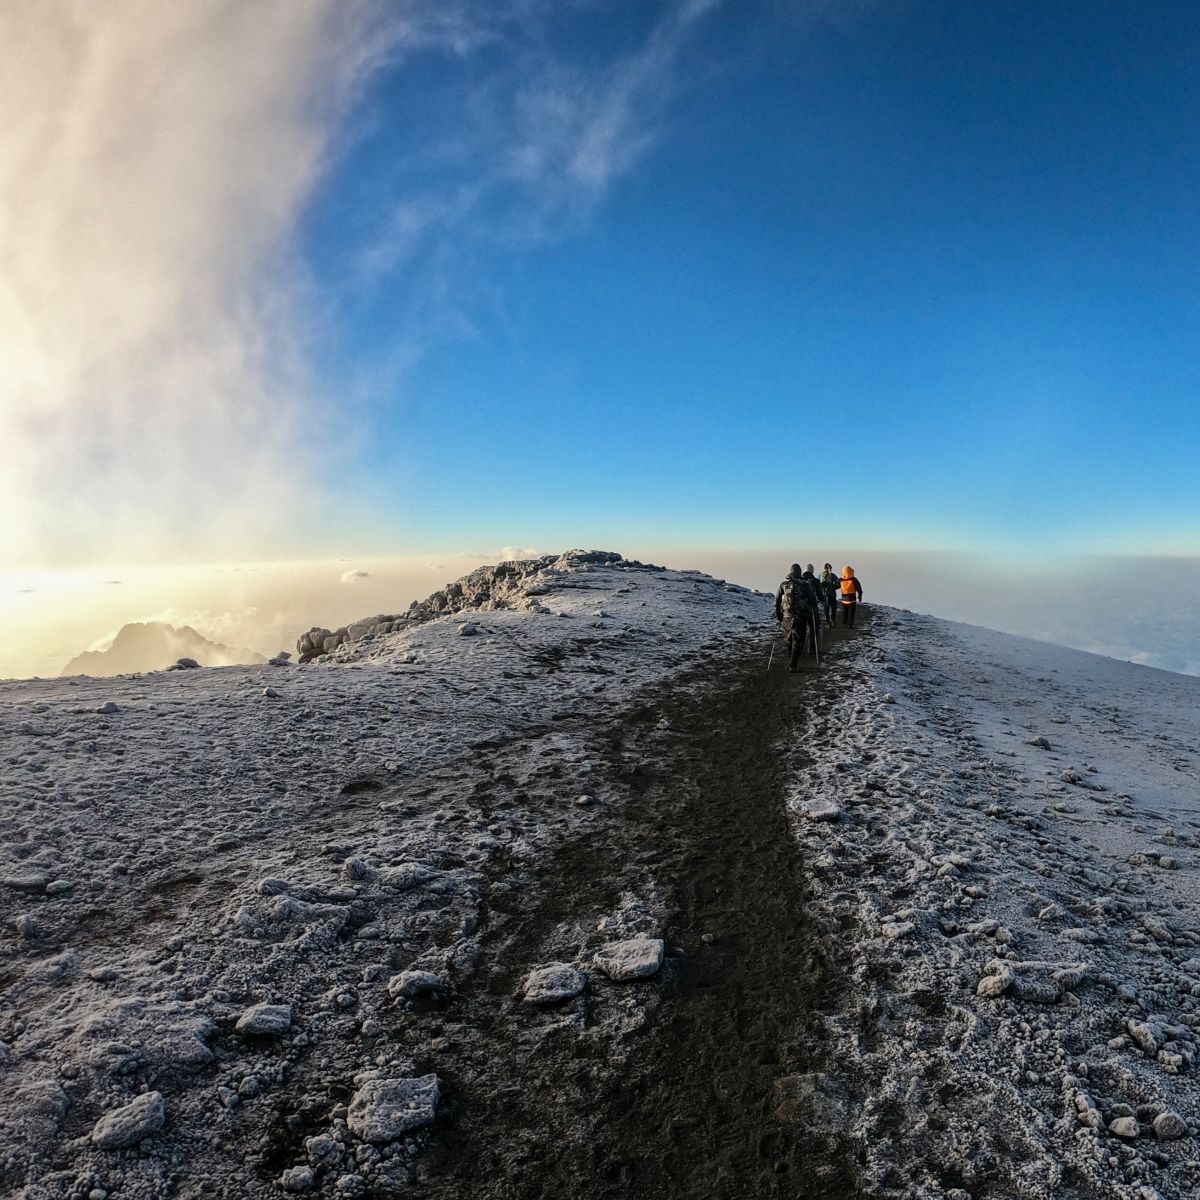 Trekkers walk a trail through snow-encrusted scree at the summit of Mount Kilimanjaro with a blue morning sky overhead